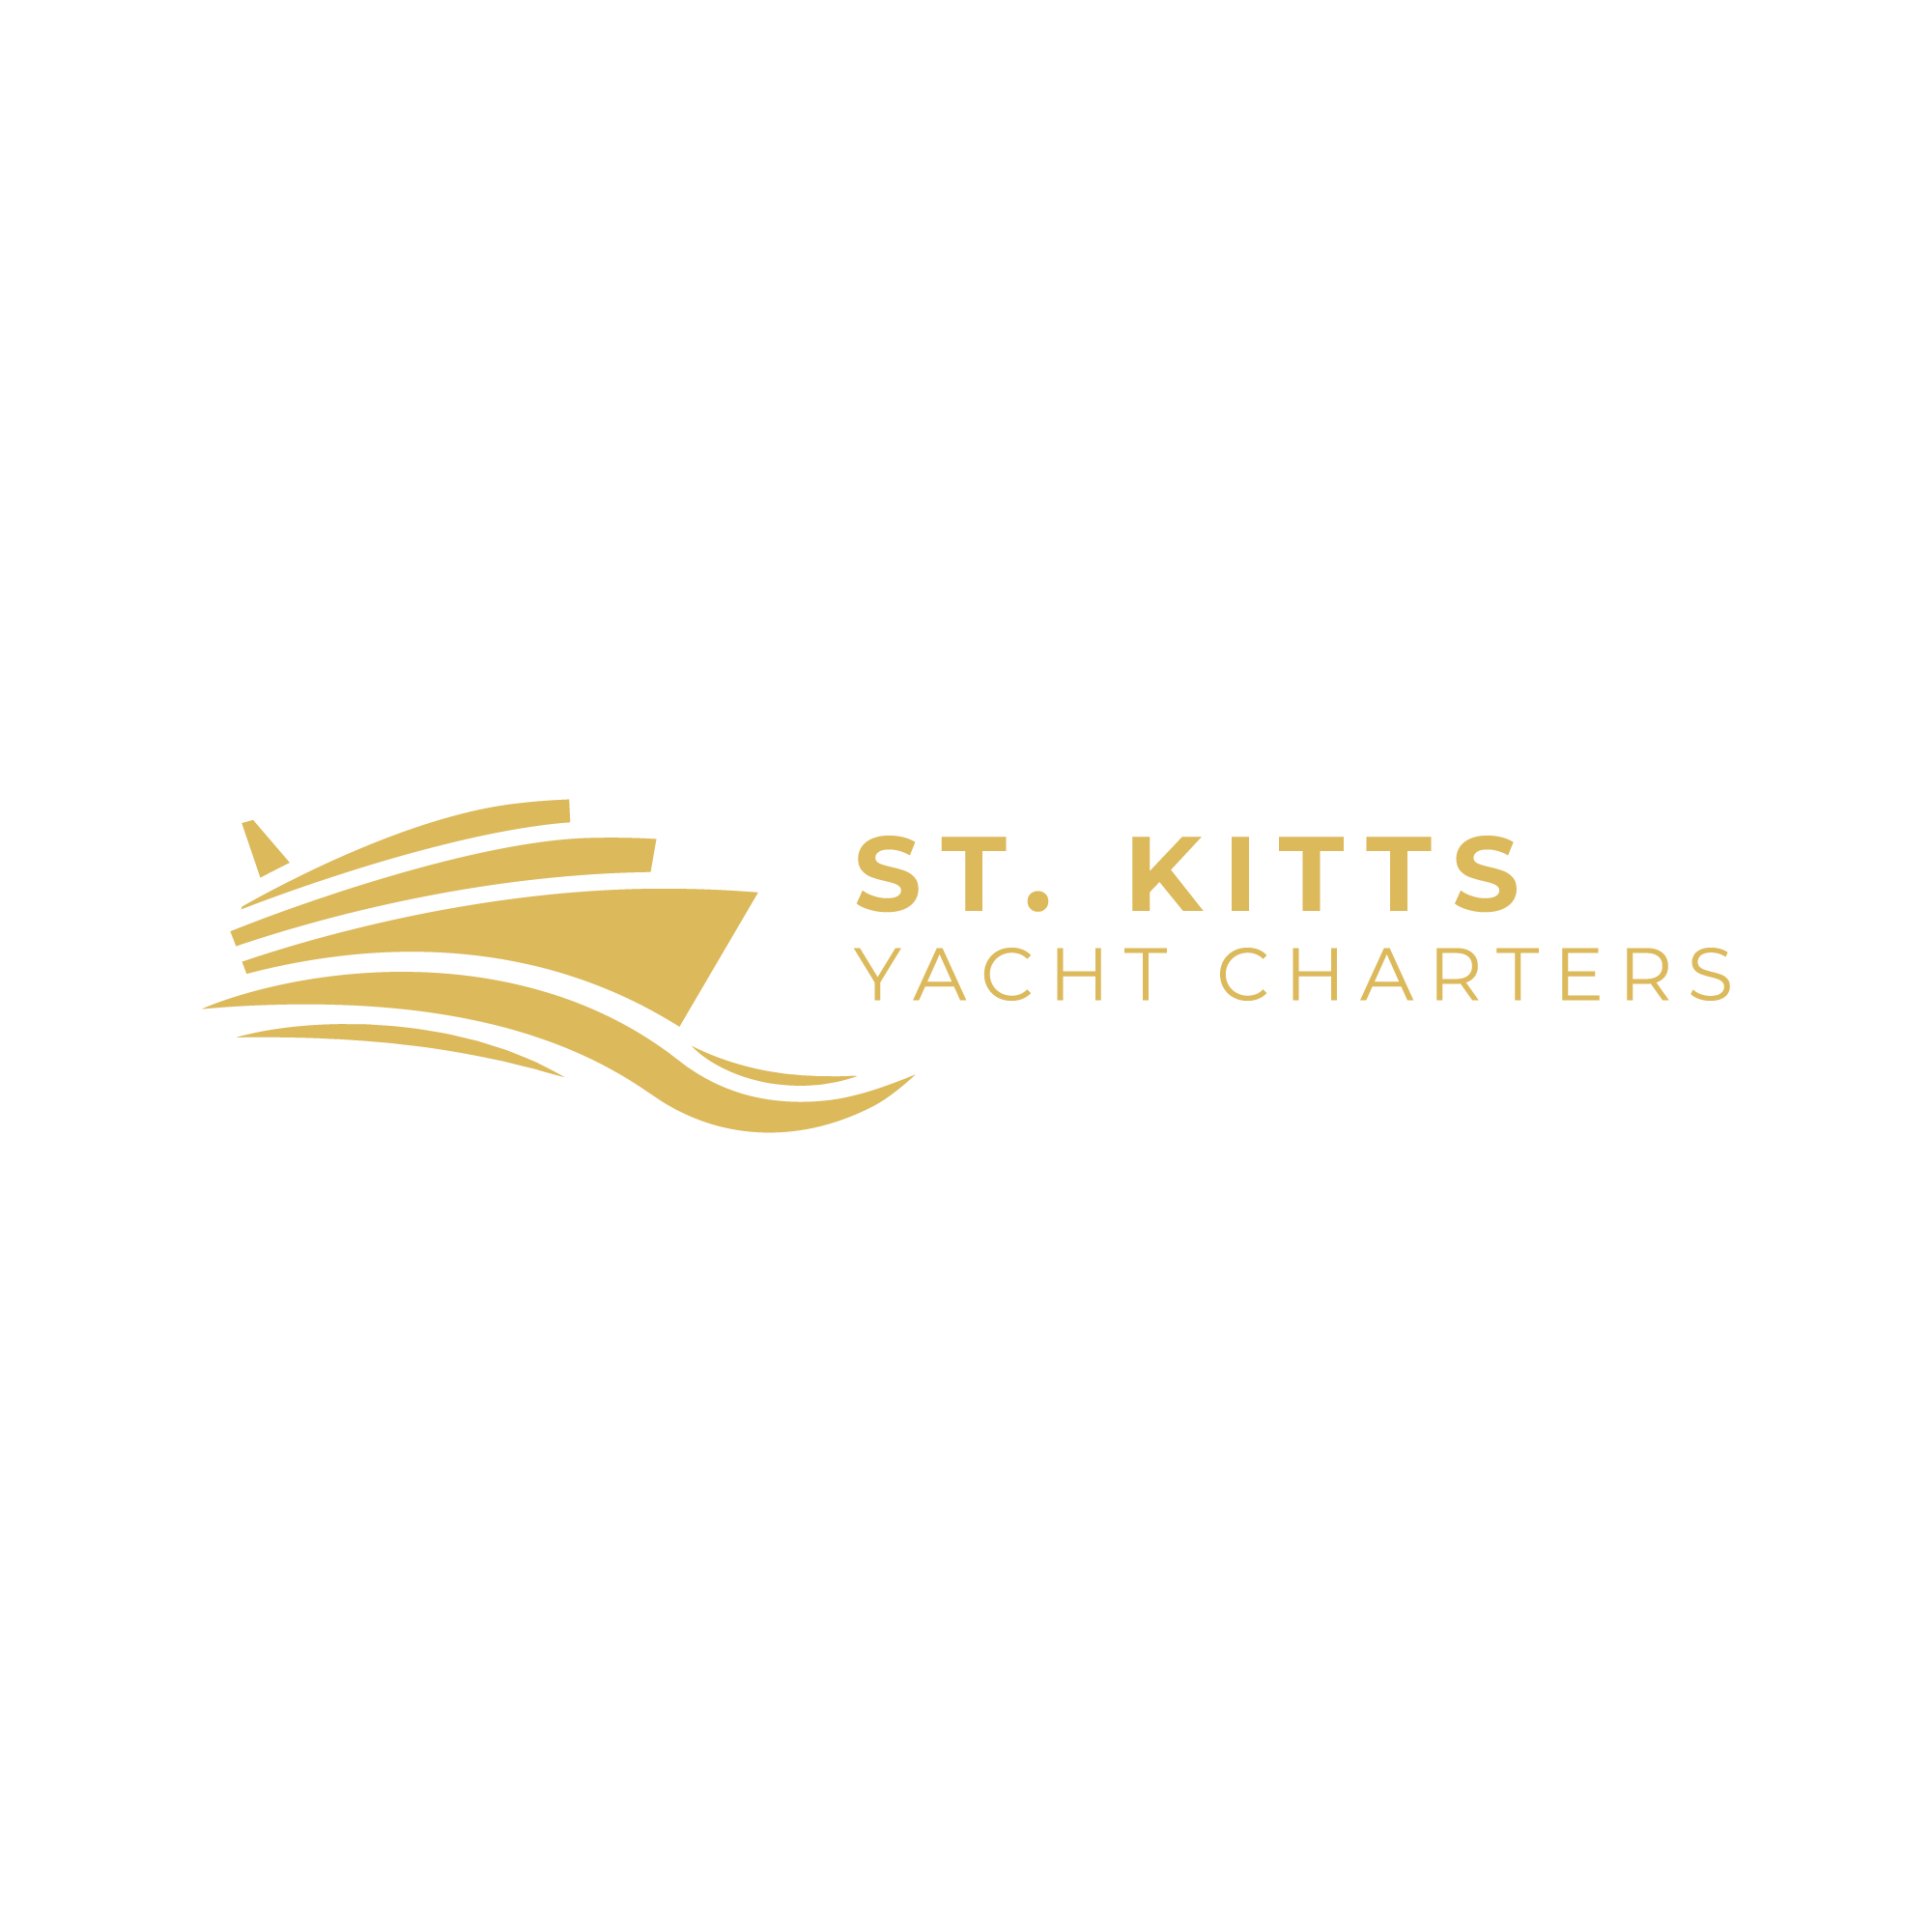 St Kitts Yacht Charters